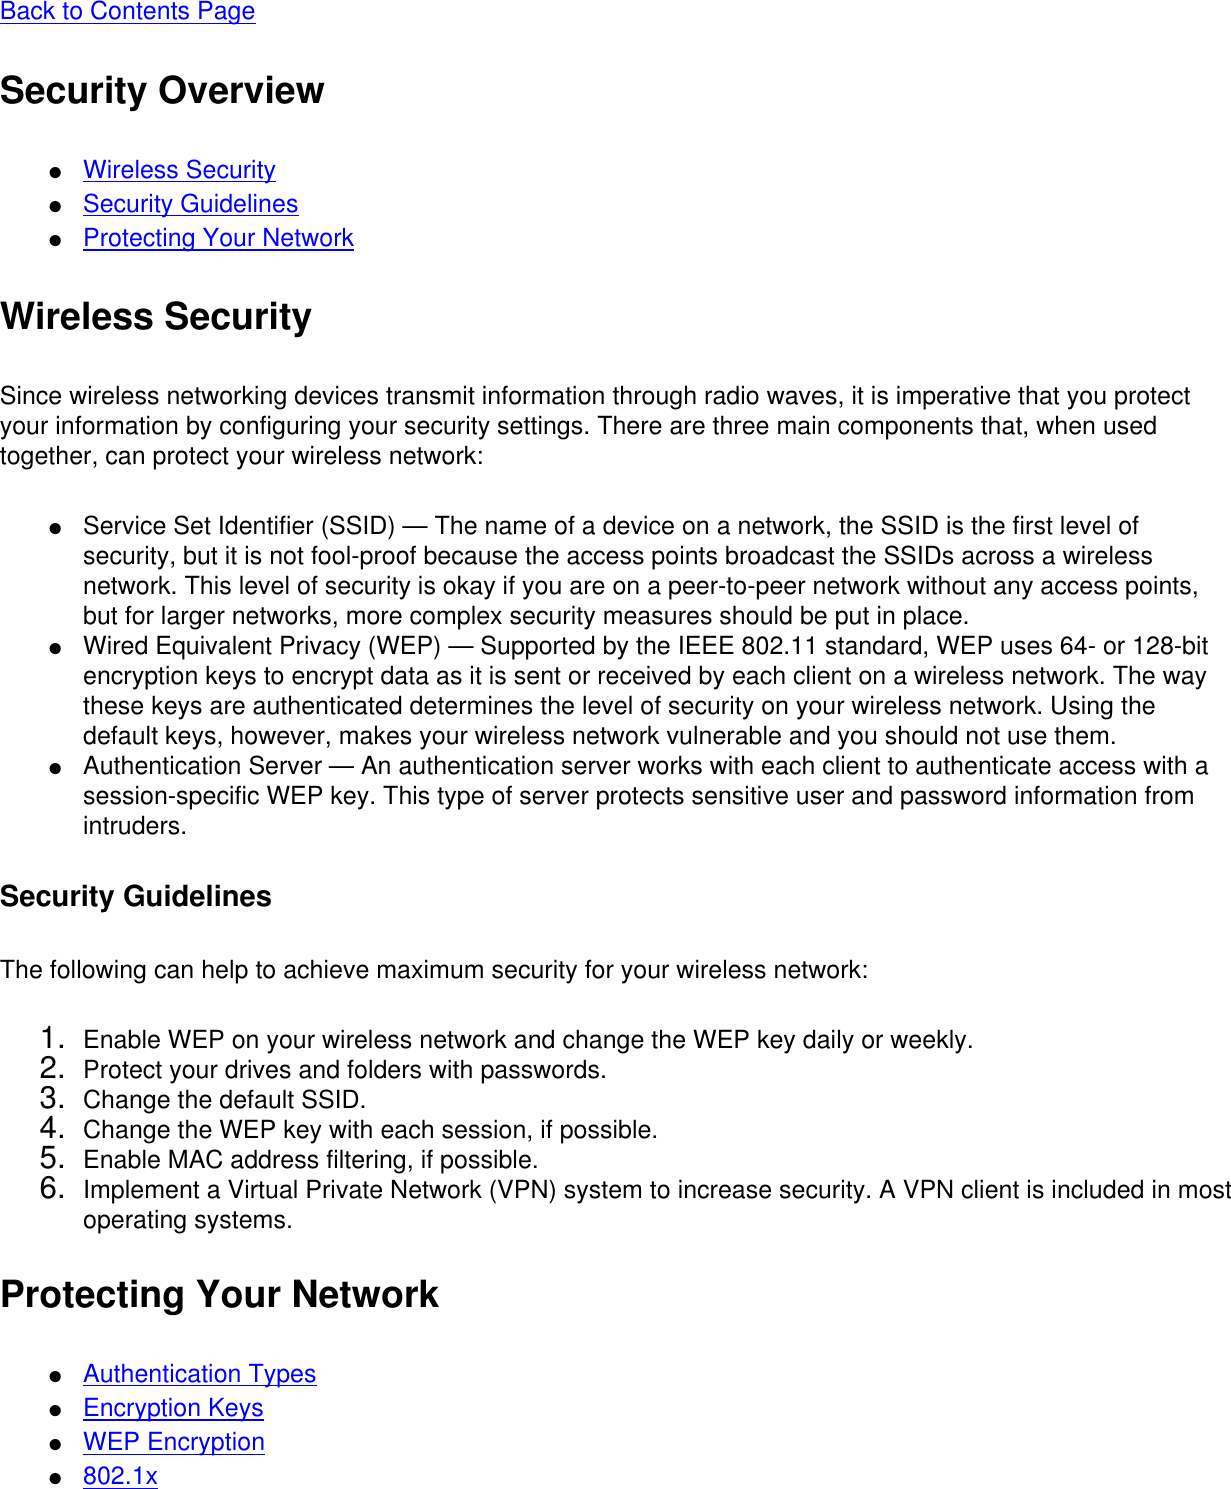 Back to Contents Page Security Overview●     Wireless Security●     Security Guidelines●     Protecting Your NetworkWireless SecuritySince wireless networking devices transmit information through radio waves, it is imperative that you protect your information by configuring your security settings. There are three main components that, when used together, can protect your wireless network: ●     Service Set Identifier (SSID) — The name of a device on a network, the SSID is the first level of security, but it is not fool-proof because the access points broadcast the SSIDs across a wireless network. This level of security is okay if you are on a peer-to-peer network without any access points, but for larger networks, more complex security measures should be put in place.●     Wired Equivalent Privacy (WEP) — Supported by the IEEE 802.11 standard, WEP uses 64- or 128-bit encryption keys to encrypt data as it is sent or received by each client on a wireless network. The way these keys are authenticated determines the level of security on your wireless network. Using the default keys, however, makes your wireless network vulnerable and you should not use them.●     Authentication Server — An authentication server works with each client to authenticate access with a session-specific WEP key. This type of server protects sensitive user and password information from intruders.Security GuidelinesThe following can help to achieve maximum security for your wireless network: 1.  Enable WEP on your wireless network and change the WEP key daily or weekly.2.  Protect your drives and folders with passwords.3.  Change the default SSID.4.  Change the WEP key with each session, if possible.5.  Enable MAC address filtering, if possible.6.  Implement a Virtual Private Network (VPN) system to increase security. A VPN client is included in most operating systems.Protecting Your Network●     Authentication Types●     Encryption Keys●     WEP Encryption●     802.1x